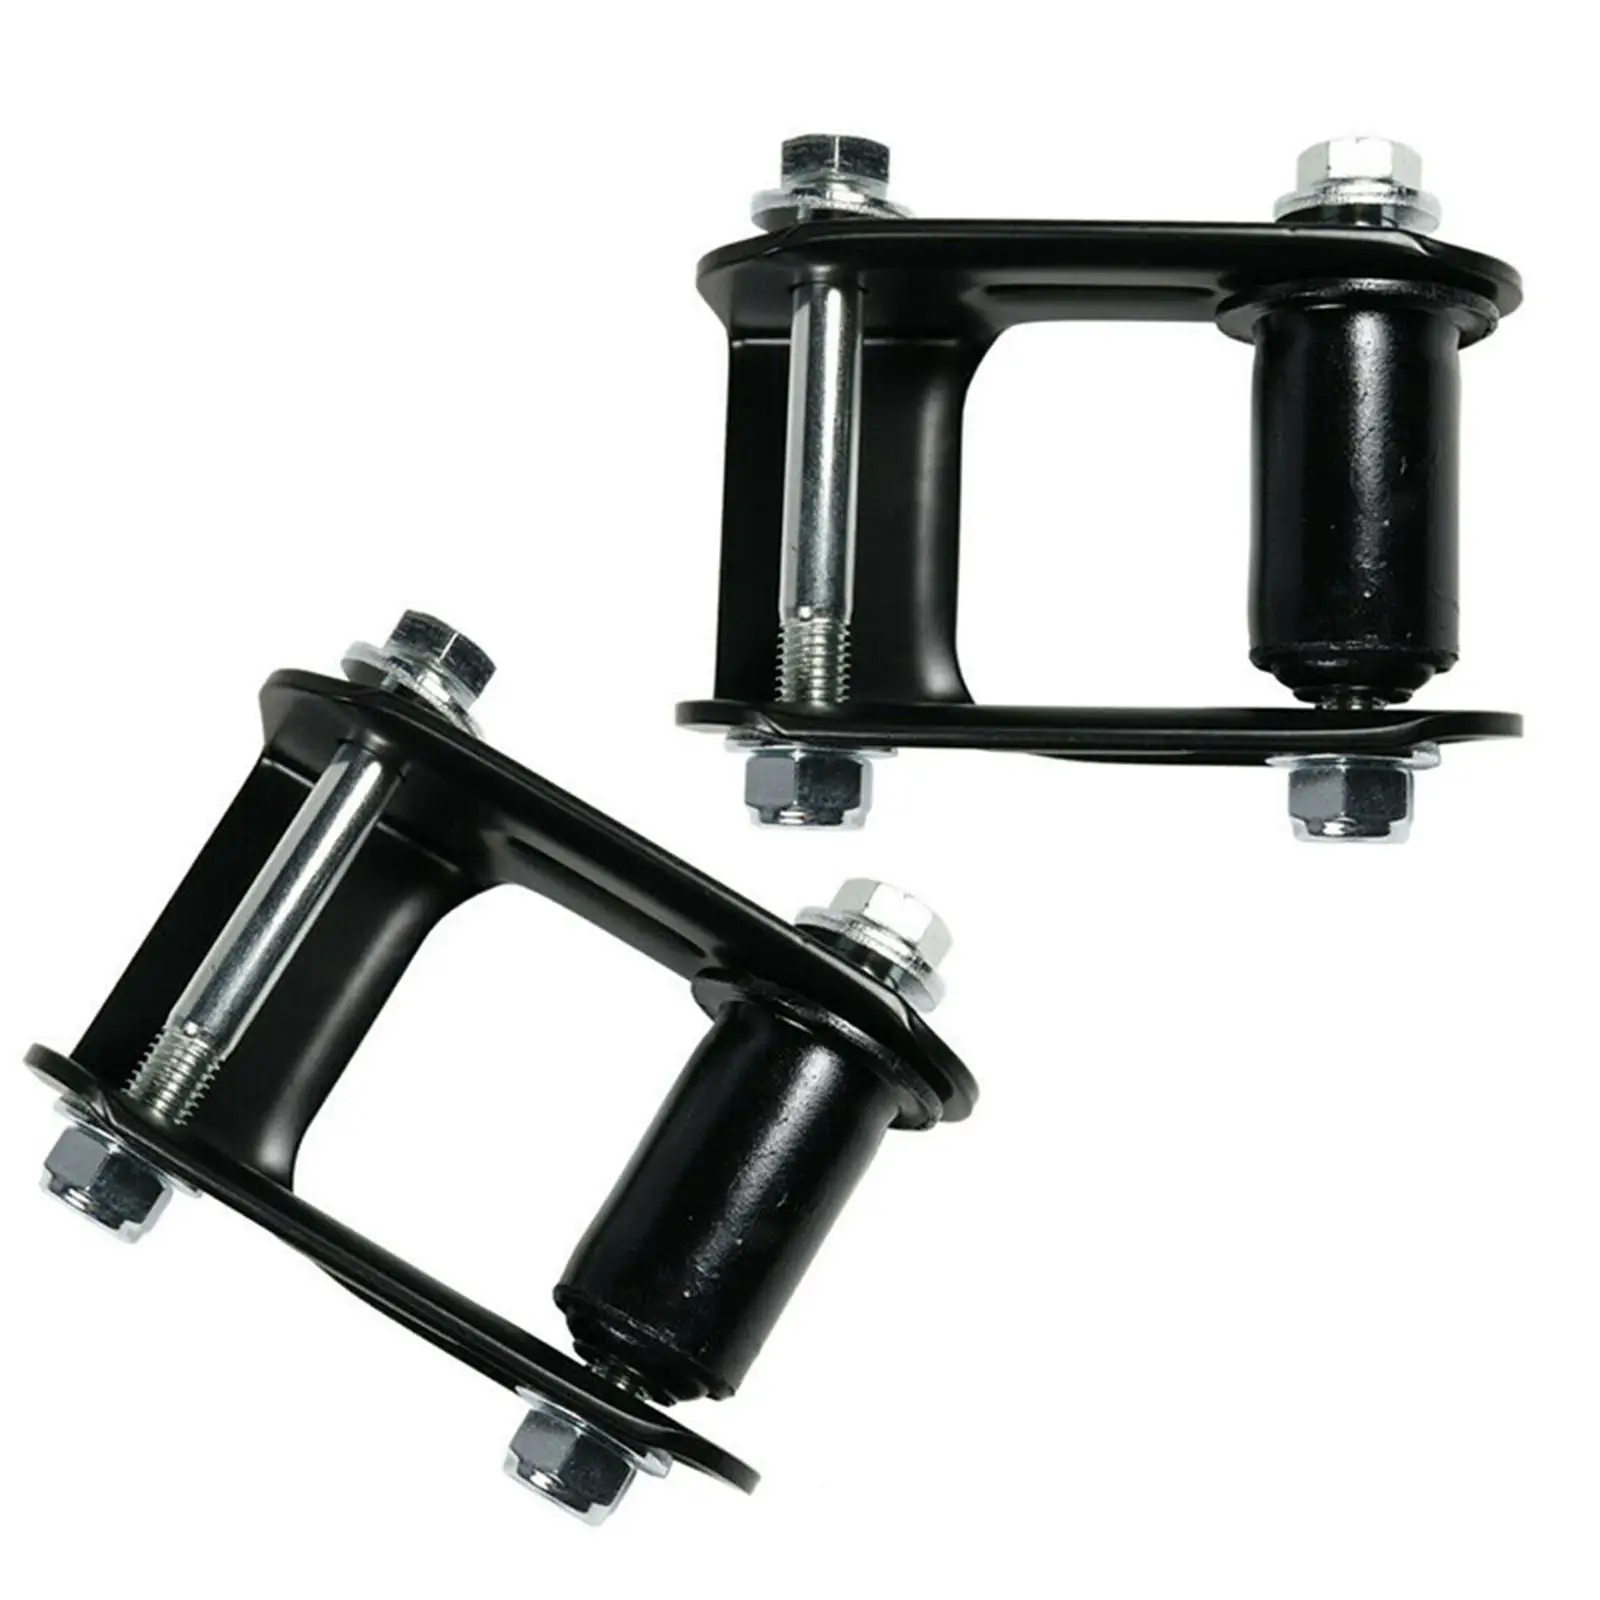 2x Rear Leaf Spring Shackle Kit Decorative Accessories replacement Blazer